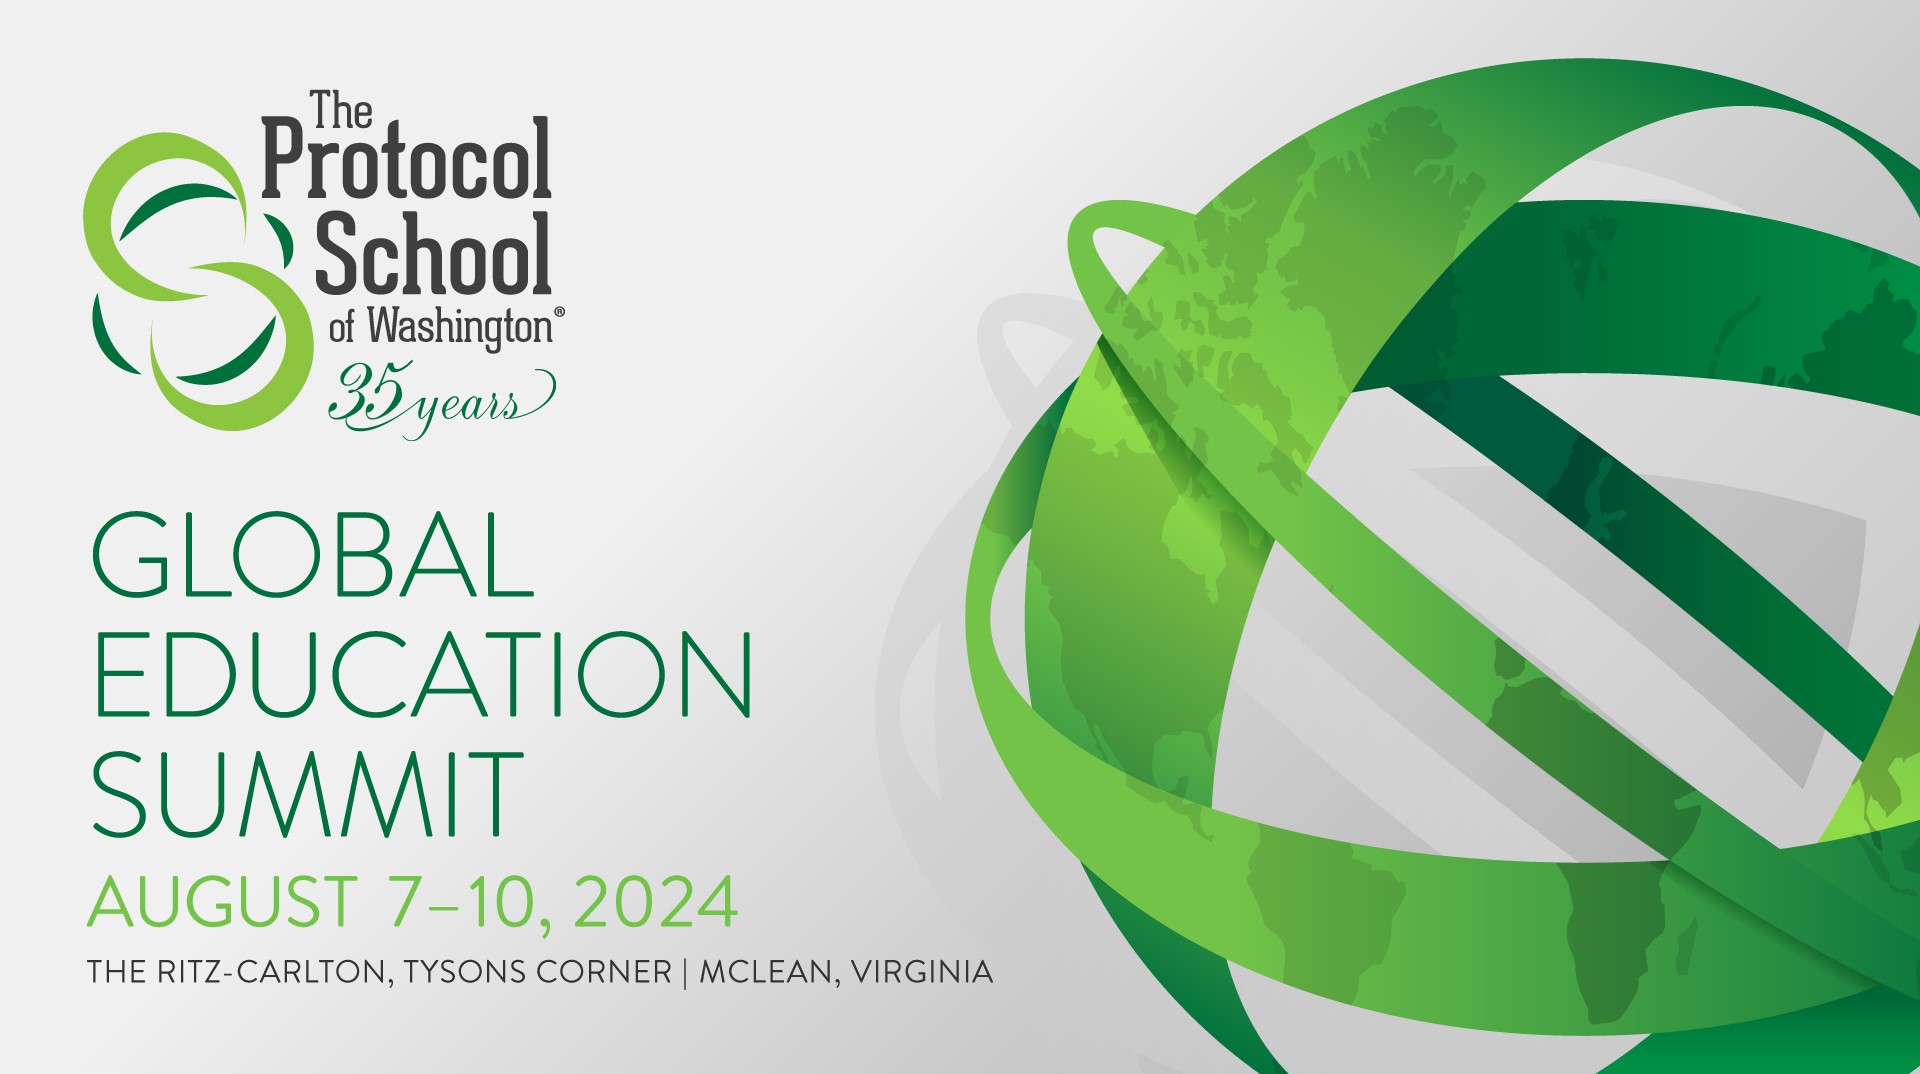 Global Education Summit Announcement